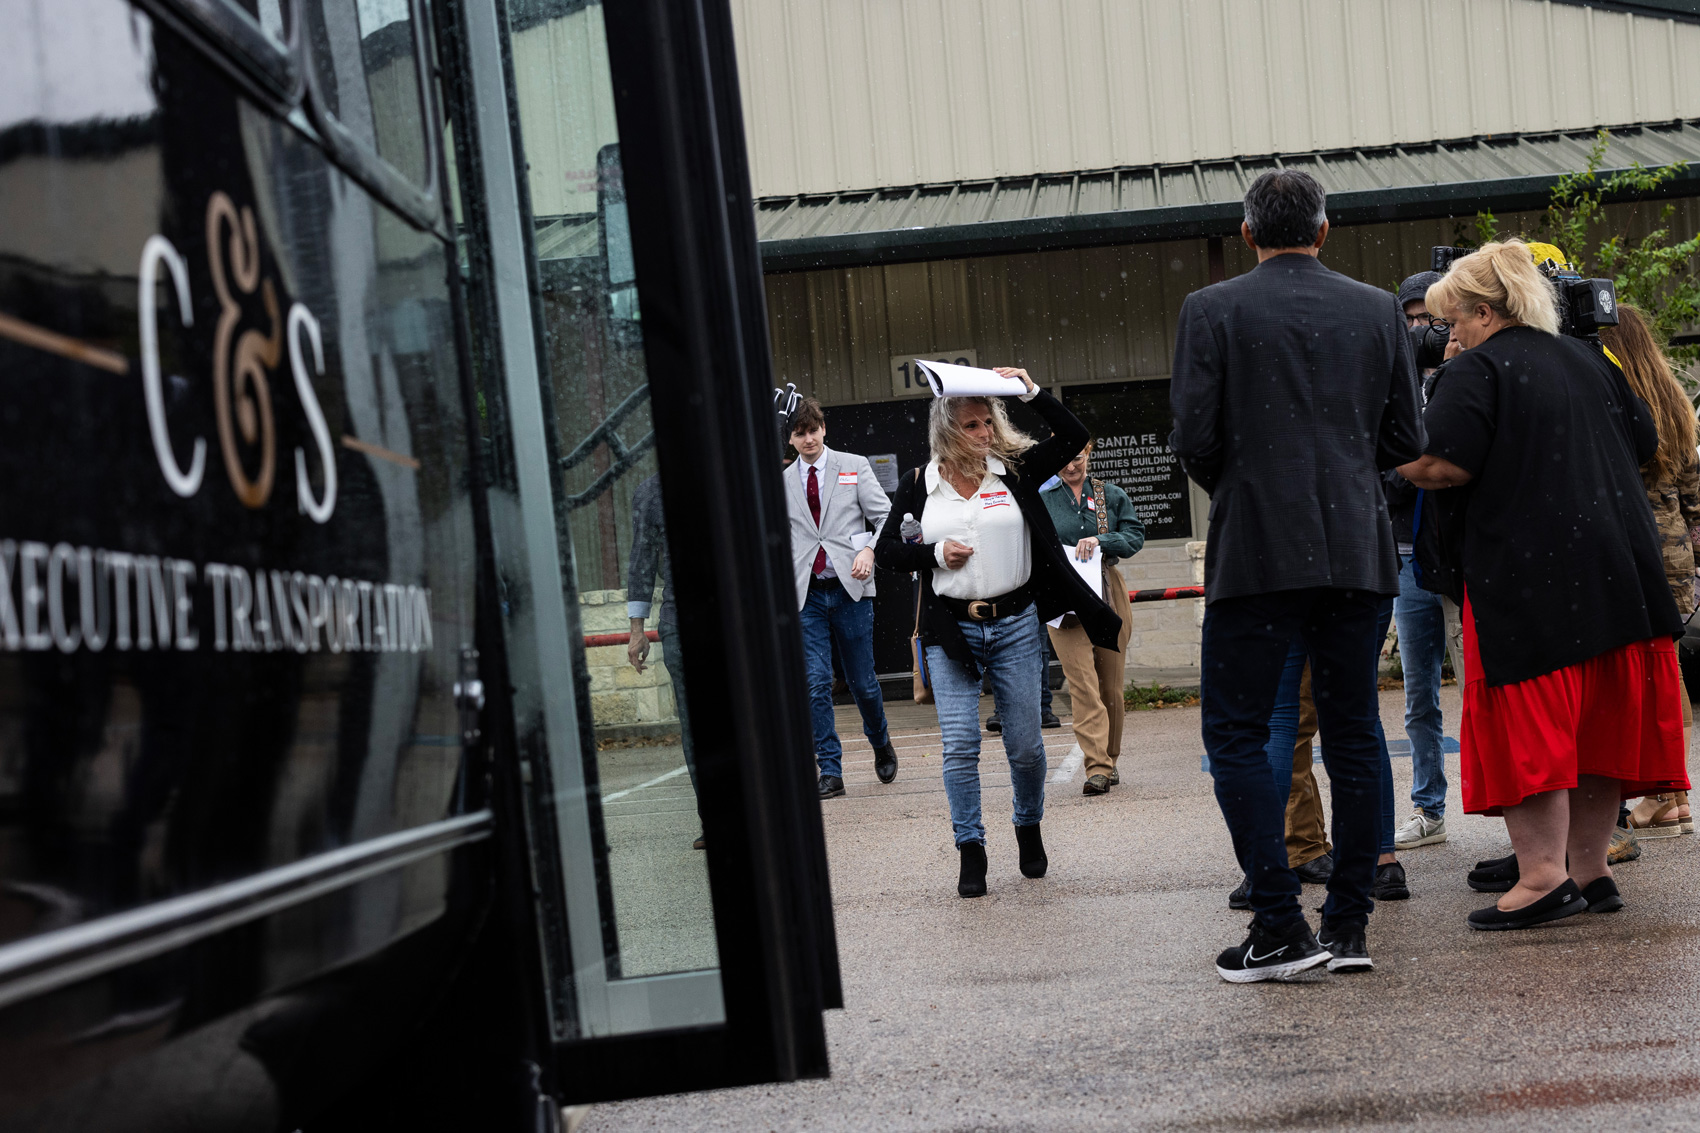 Mary Arrendell, mayor of Plum Grove, and Texas legislators and staff enter a bus to take a tour around the Colony Ridge development